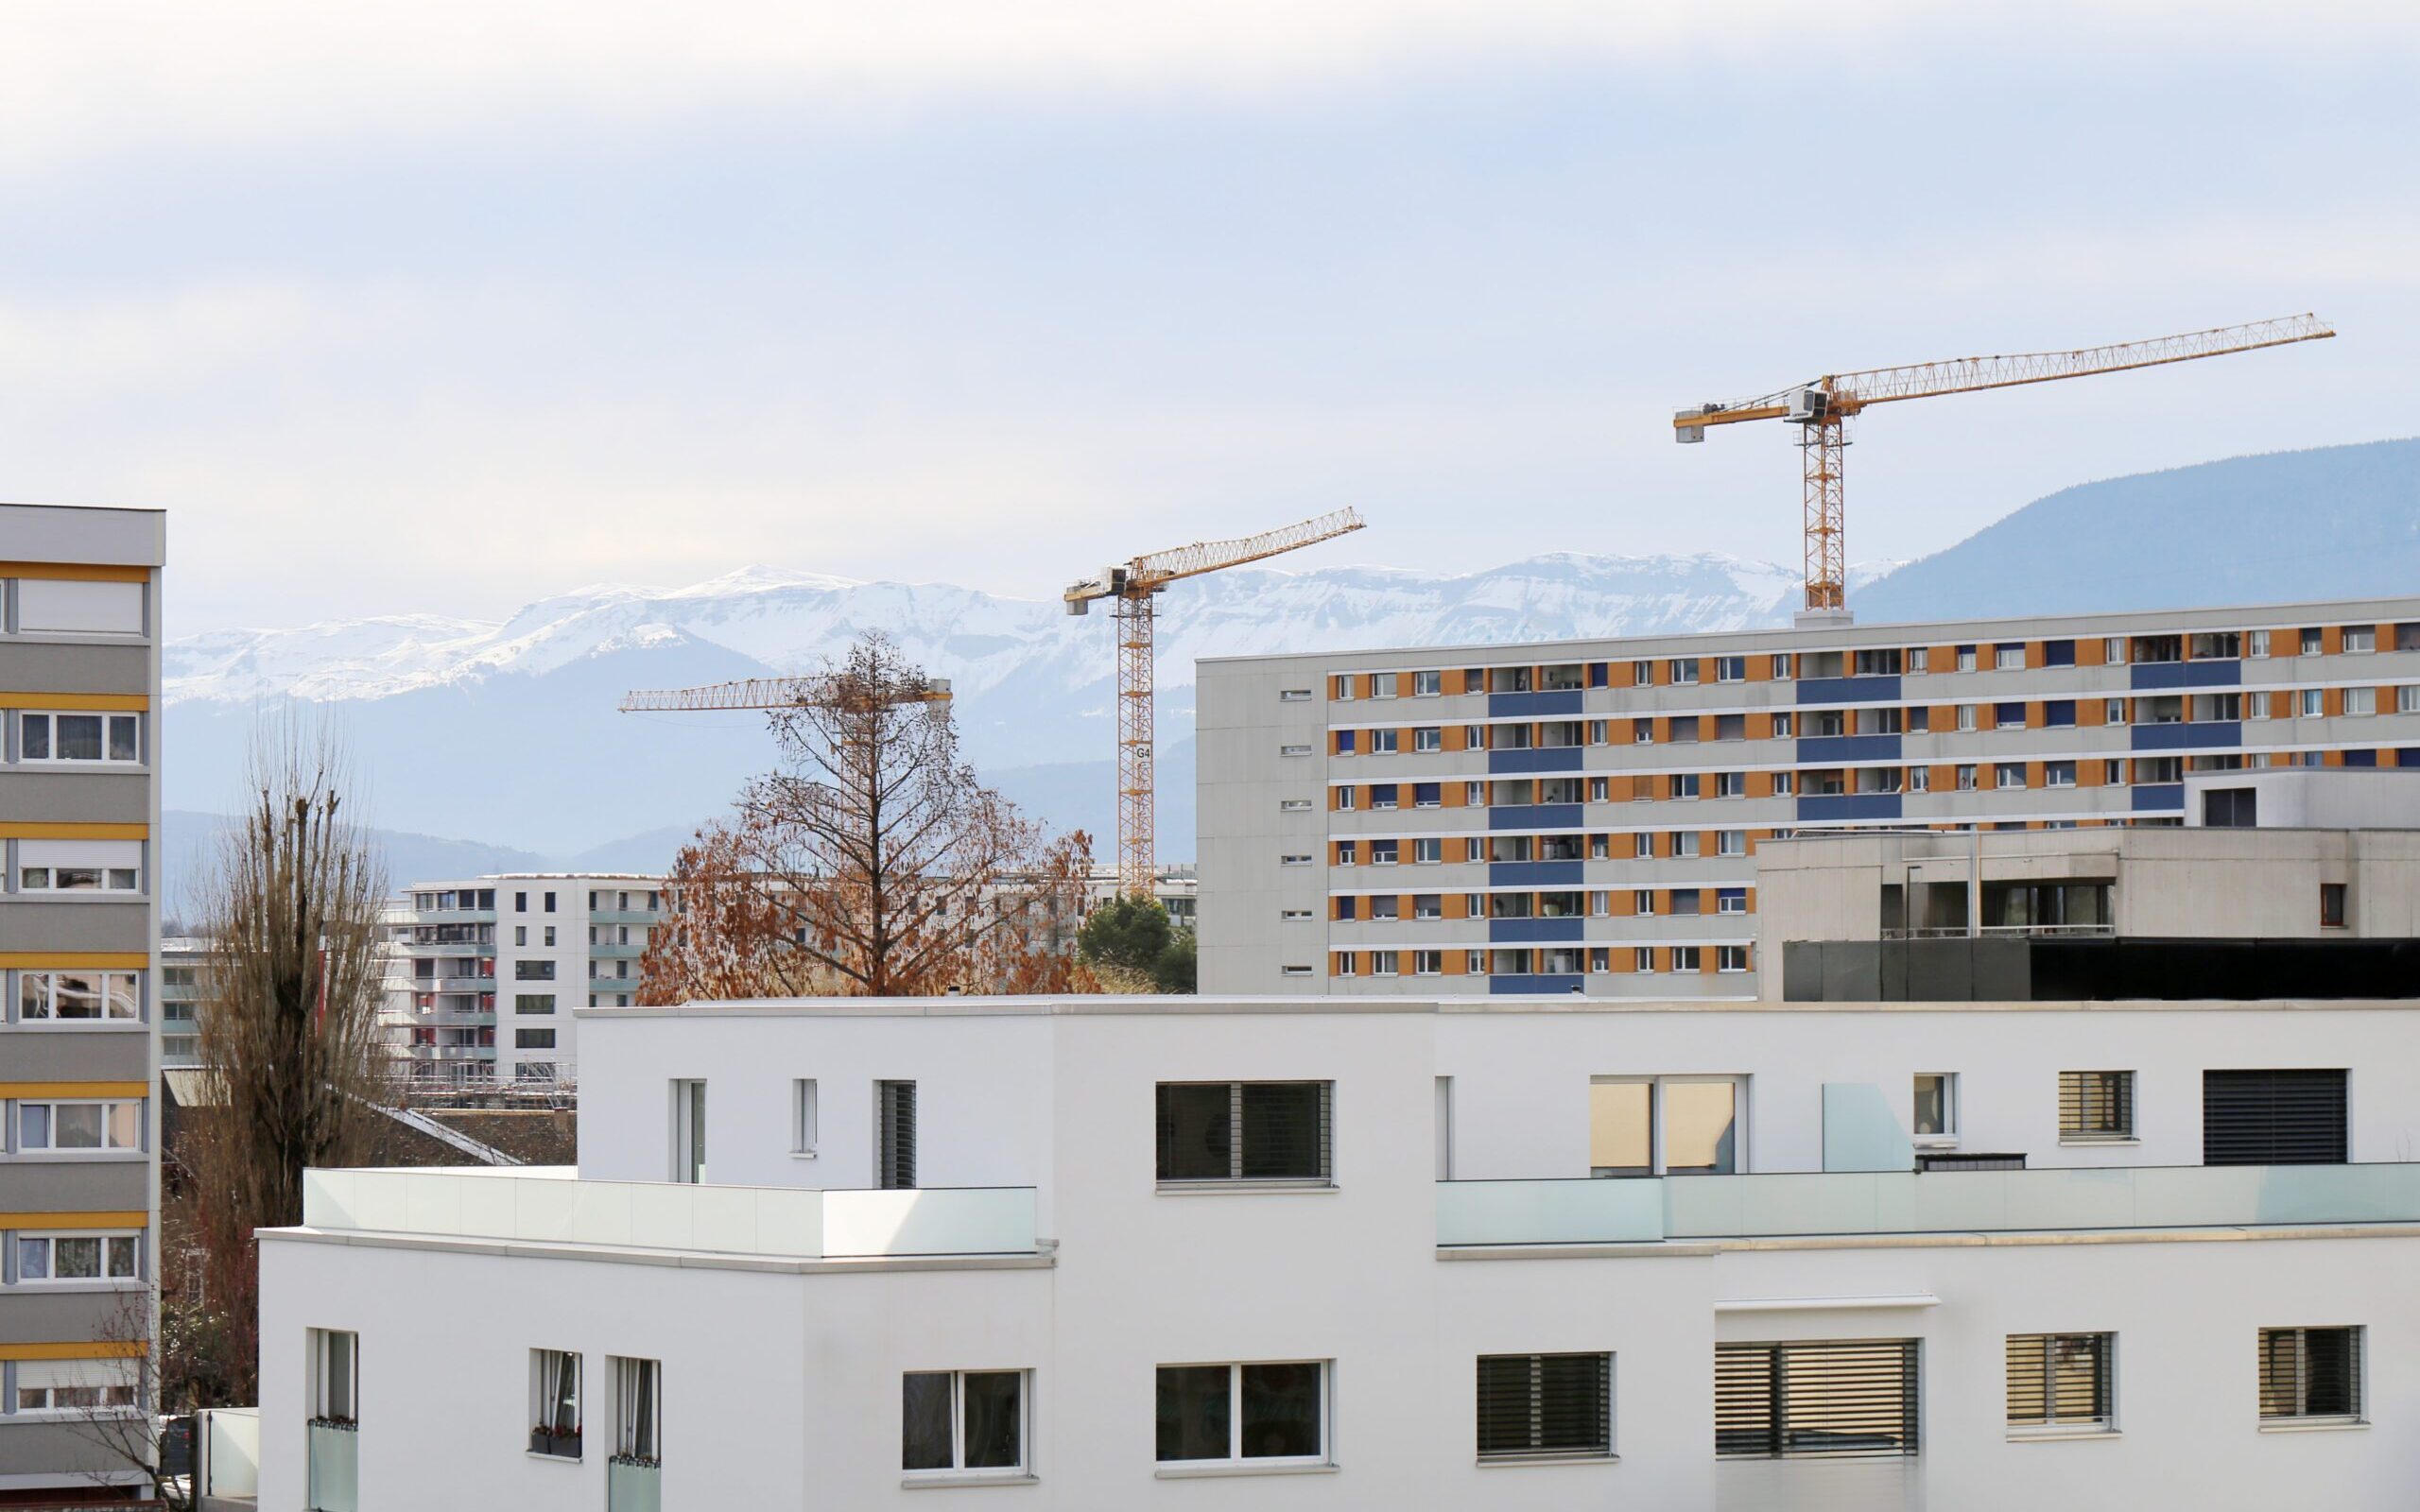 Photo with residential buildings and cranes